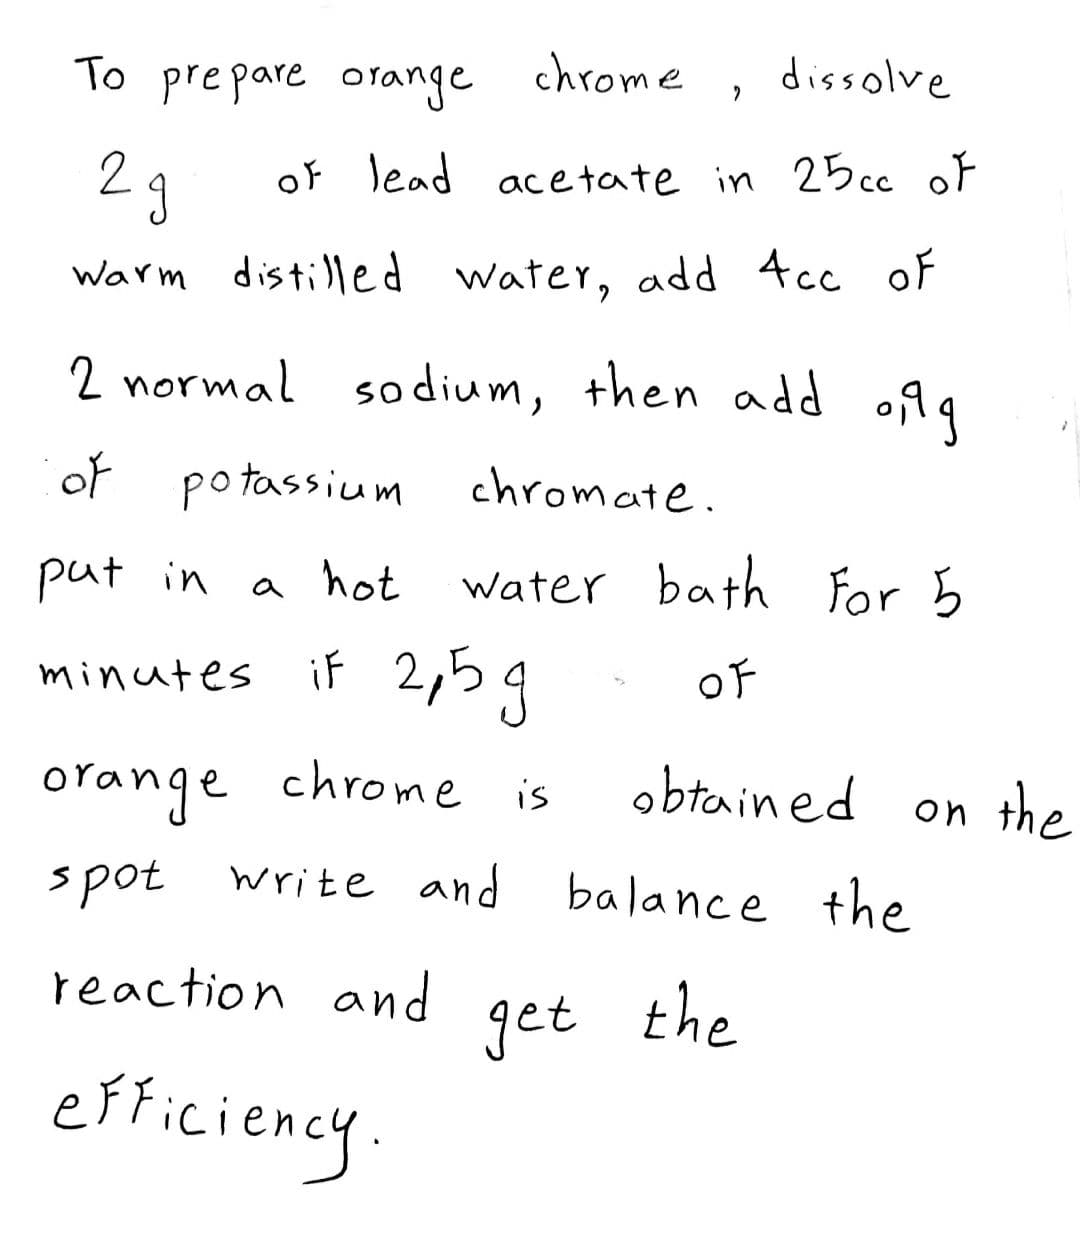 To prepare orange chrome
dissolve
2 g
of lead acetate in 25cc oF
Warm distilled water, add 4cc of
2 normal sodium, then add o99
of
potassium chromate.
put in
a hot
water bath for 5
minutes if 2,59
OF
orange chrome is
obtained on the
spot
write and balance the
reaction and
get
the
efticiency
